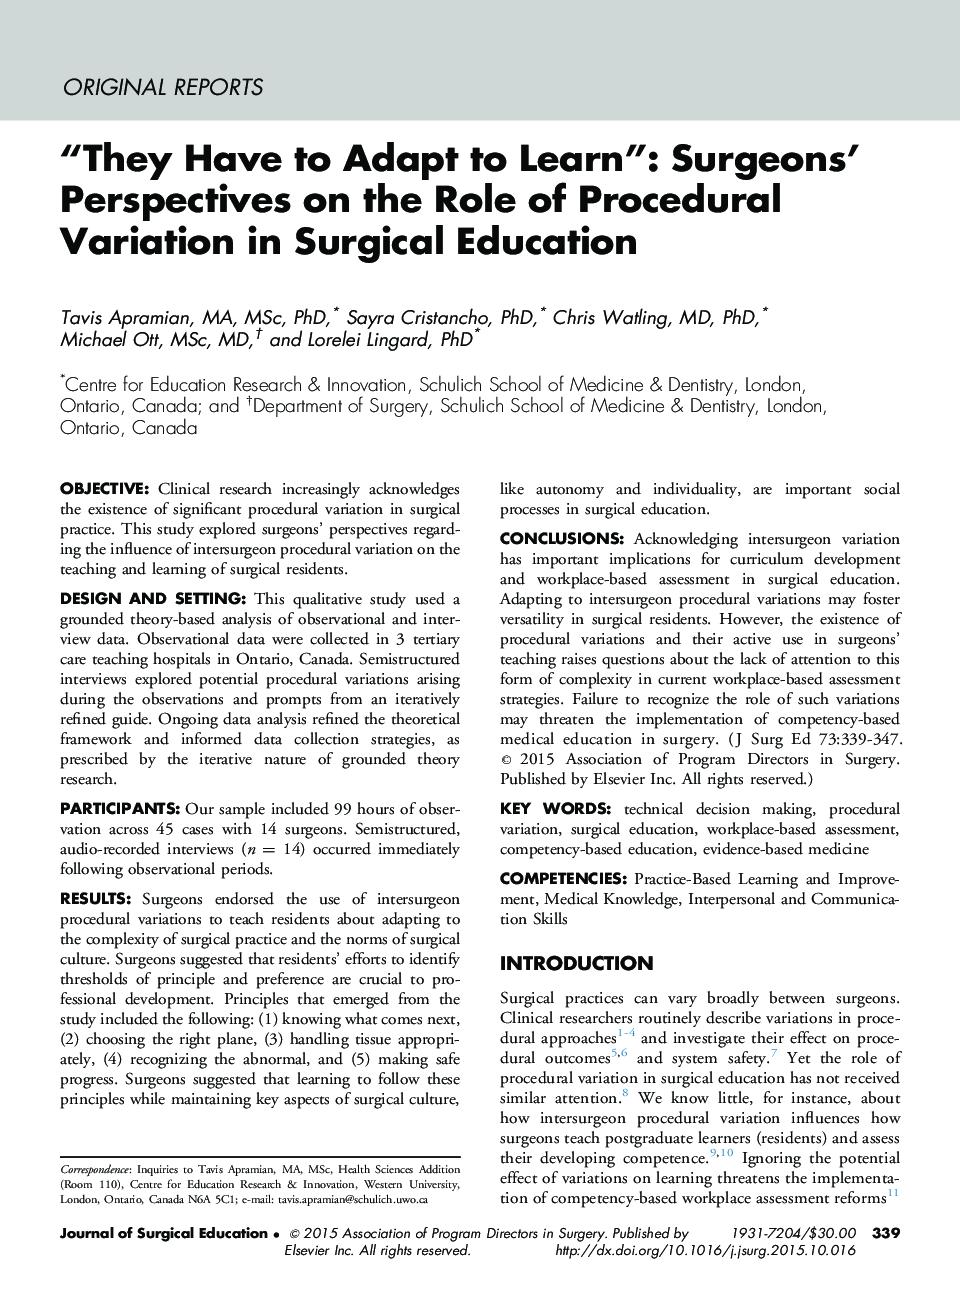 “They Have to Adapt to Learn”: Surgeons’ Perspectives on the Role of Procedural Variation in Surgical Education